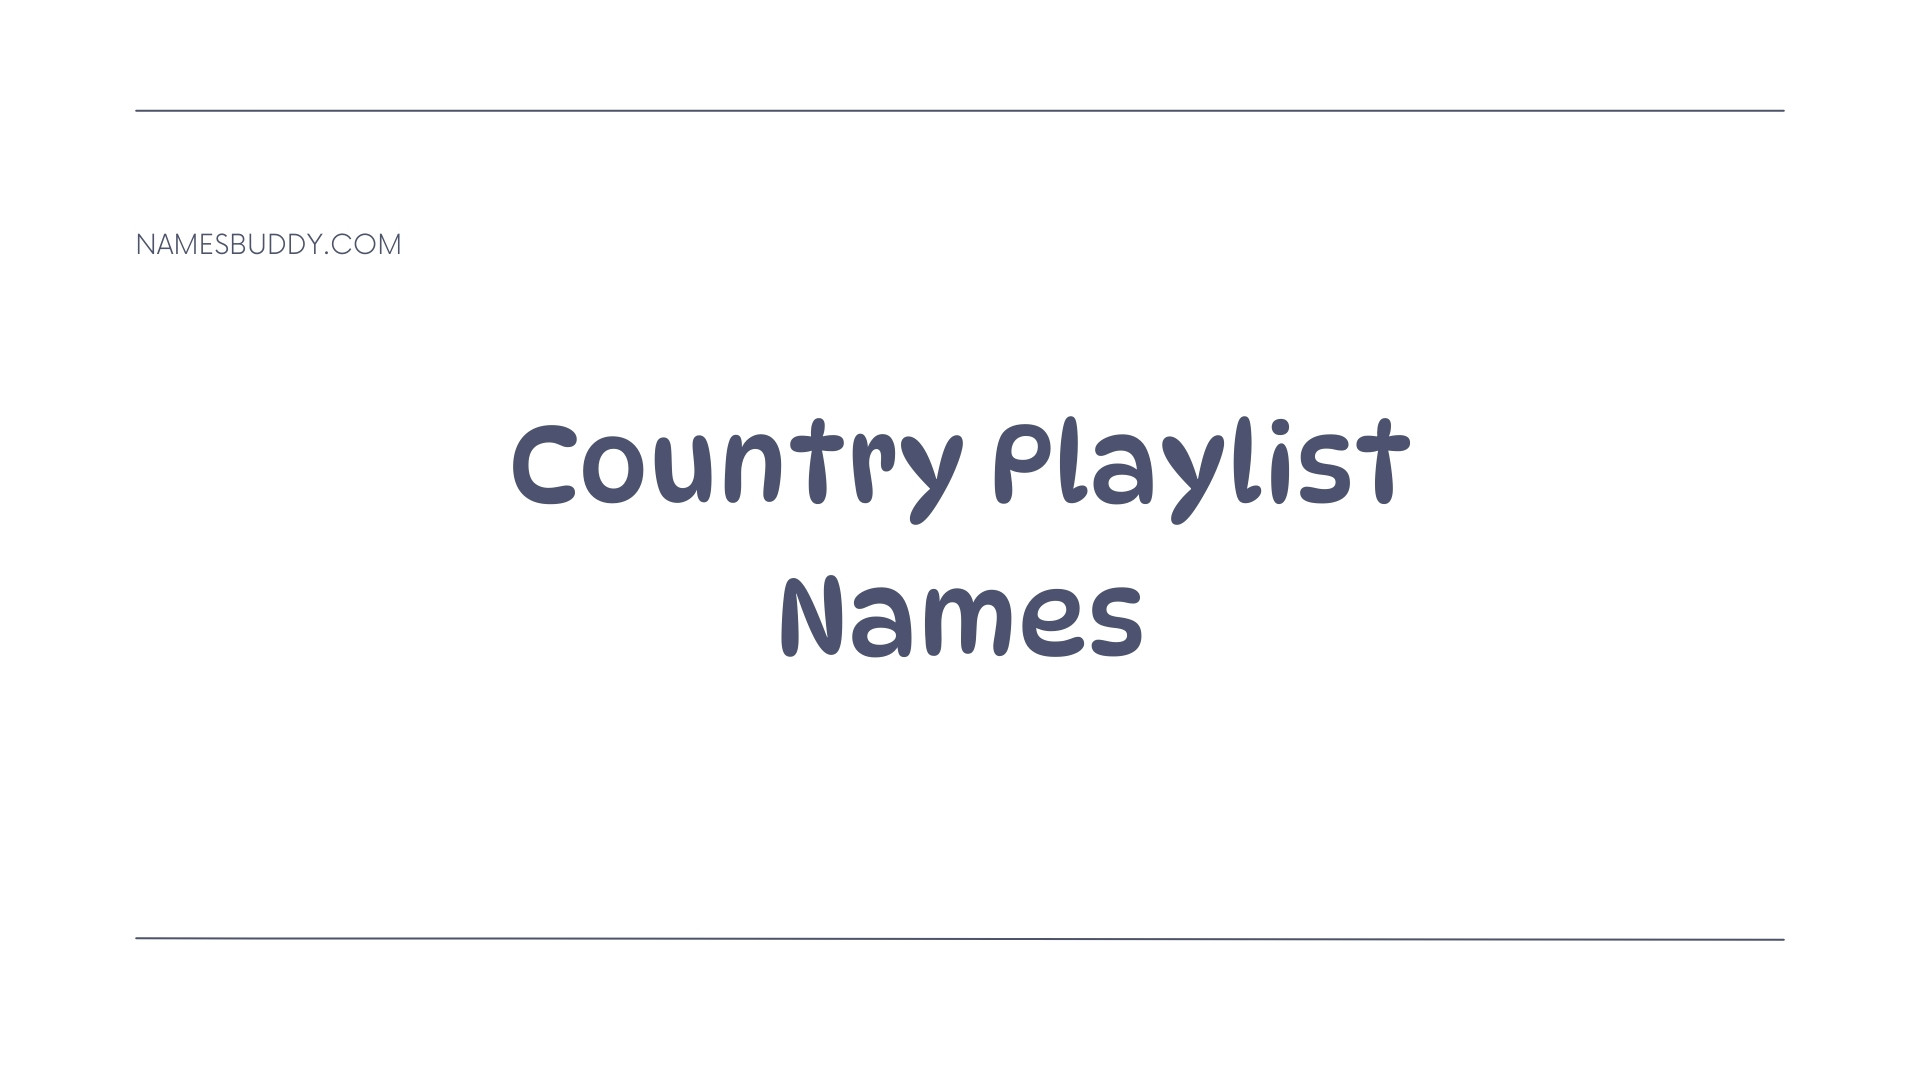 200+ Country Playlist Names To Consider